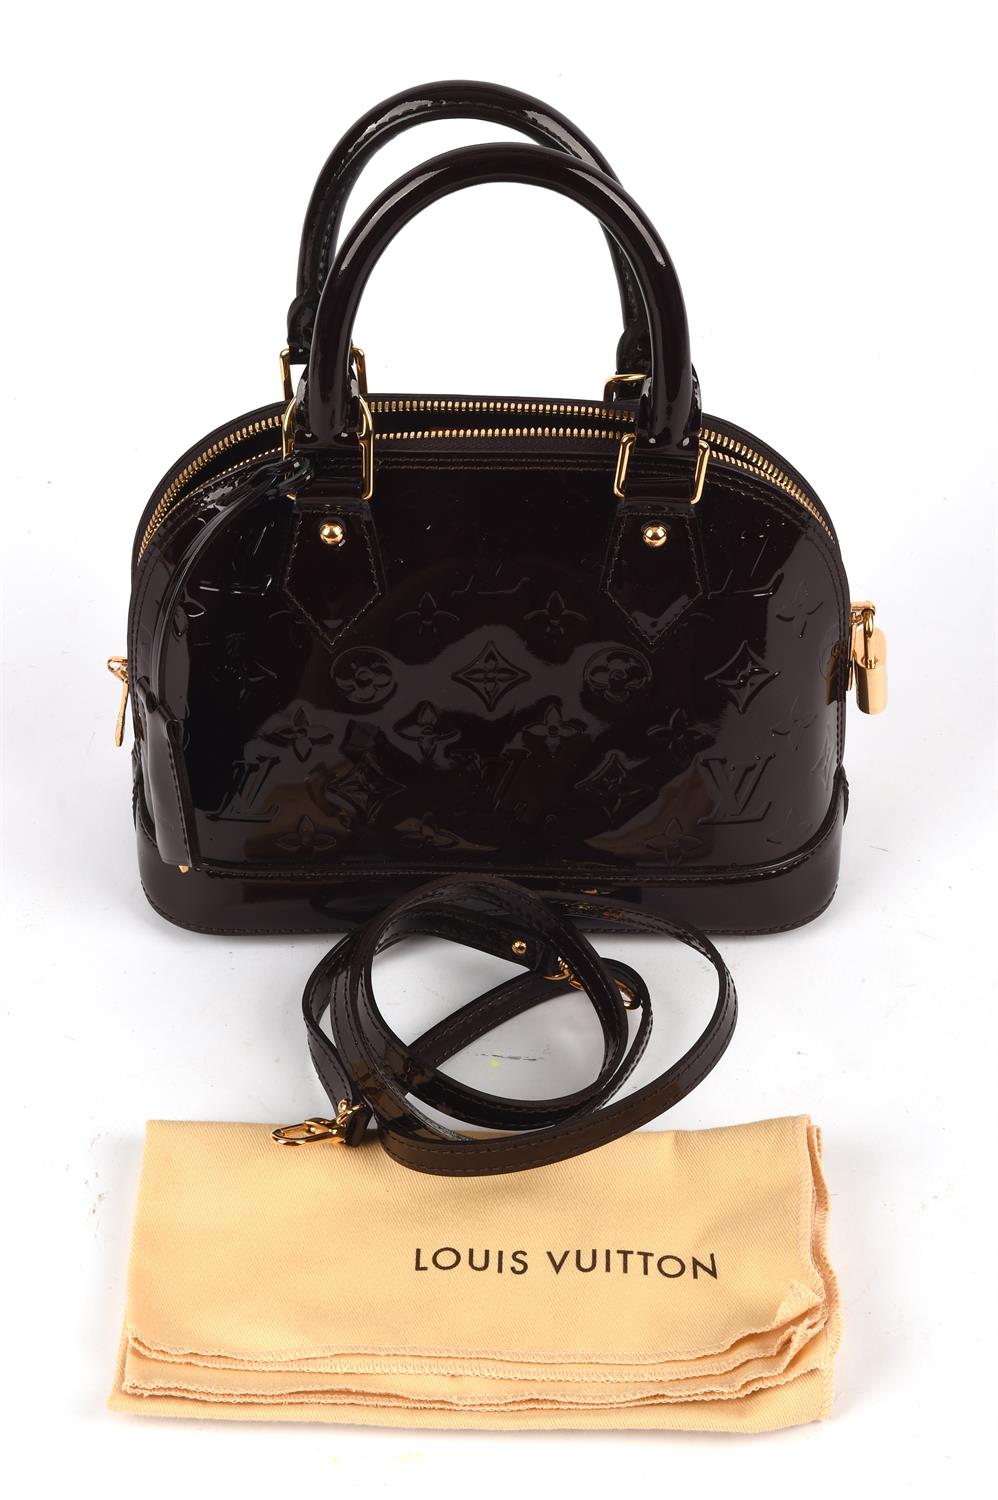 LOUIS VUITTON burgundy Vernis varnished leather Armarante Alma BB bag with gold hardware with